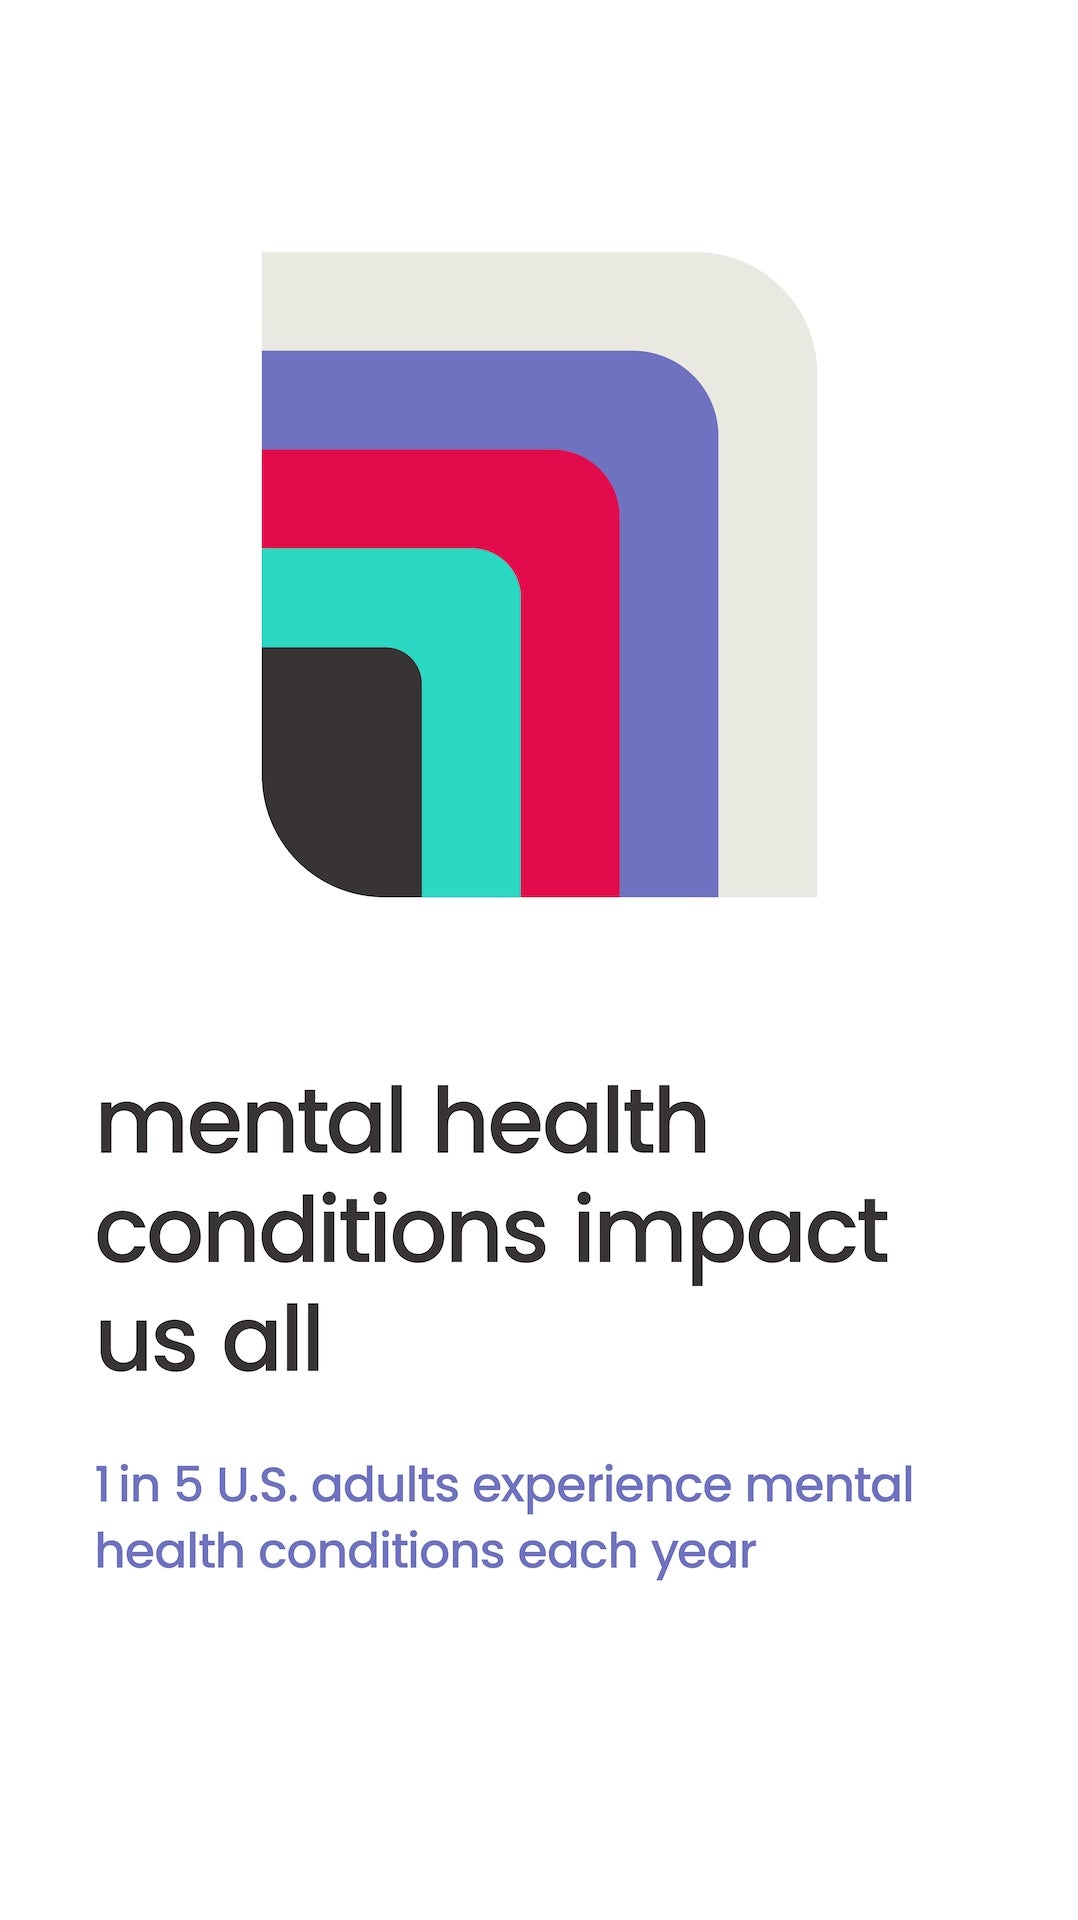 Mental Health Conditions impact us all. 1 in 5 U.S. adults experience mental health conditions each year. 